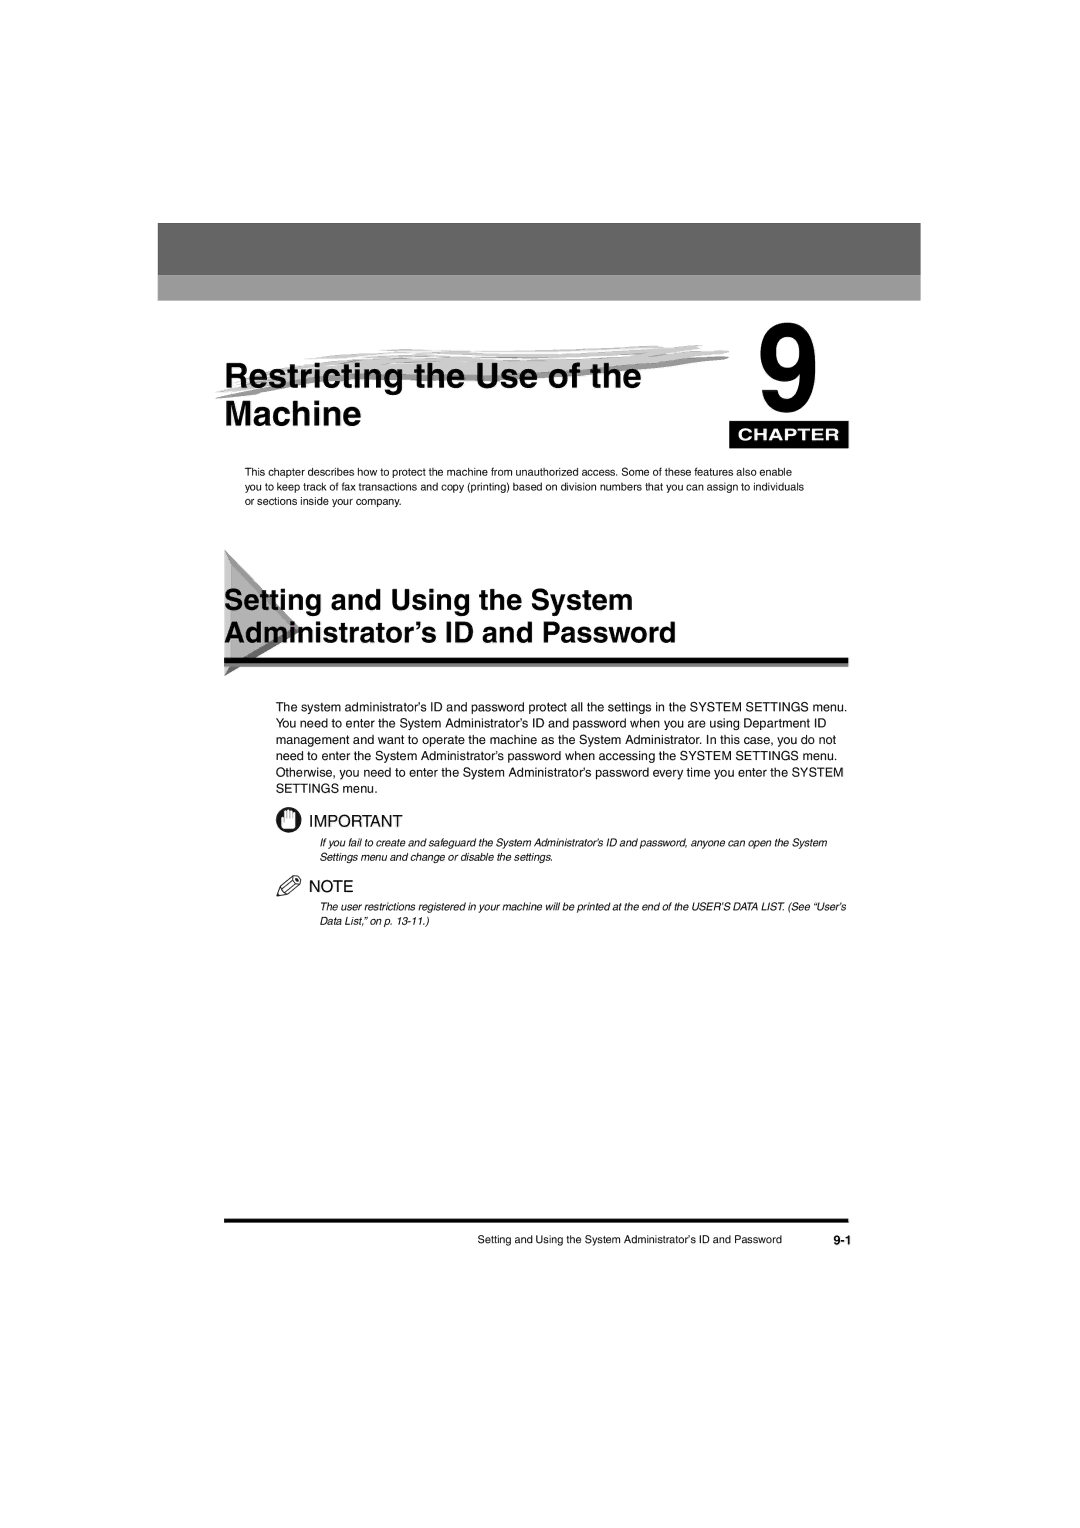 Canon L380S manual Restricting the Use of the Machine, Setting and Using the System Administrator’s ID and Password 